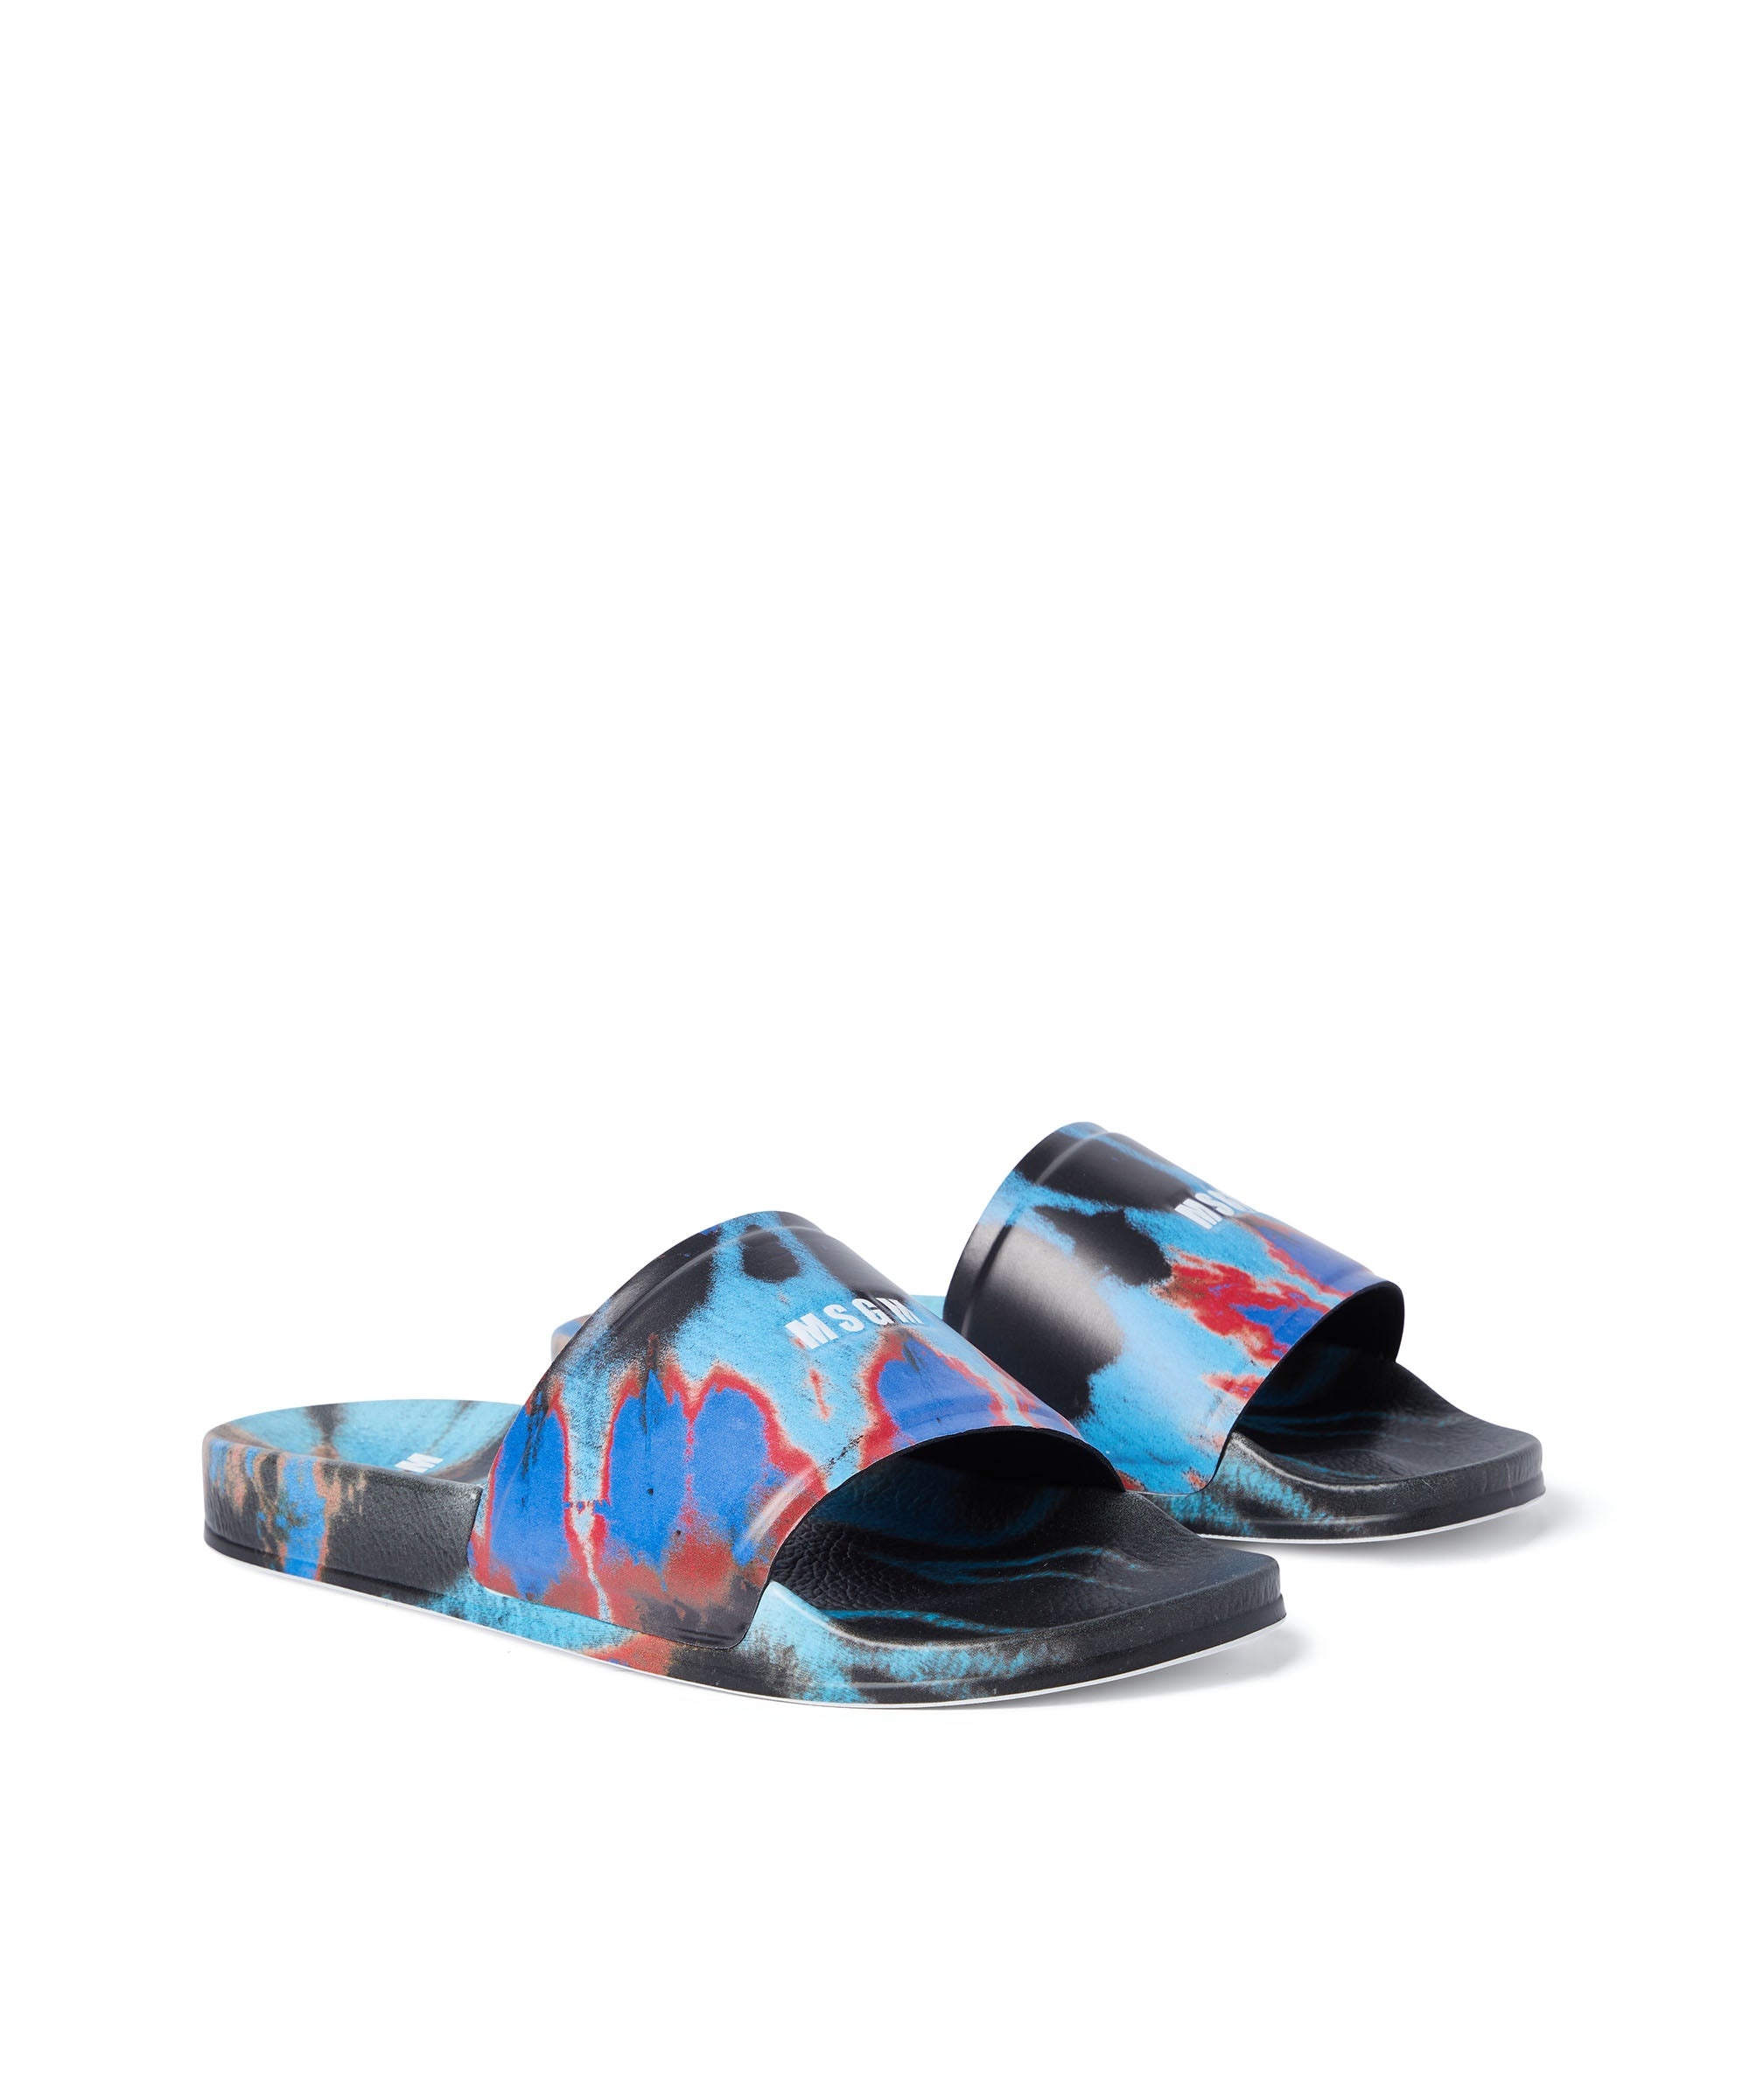 Tie dye pool slippers with MSGM micro logo - 2